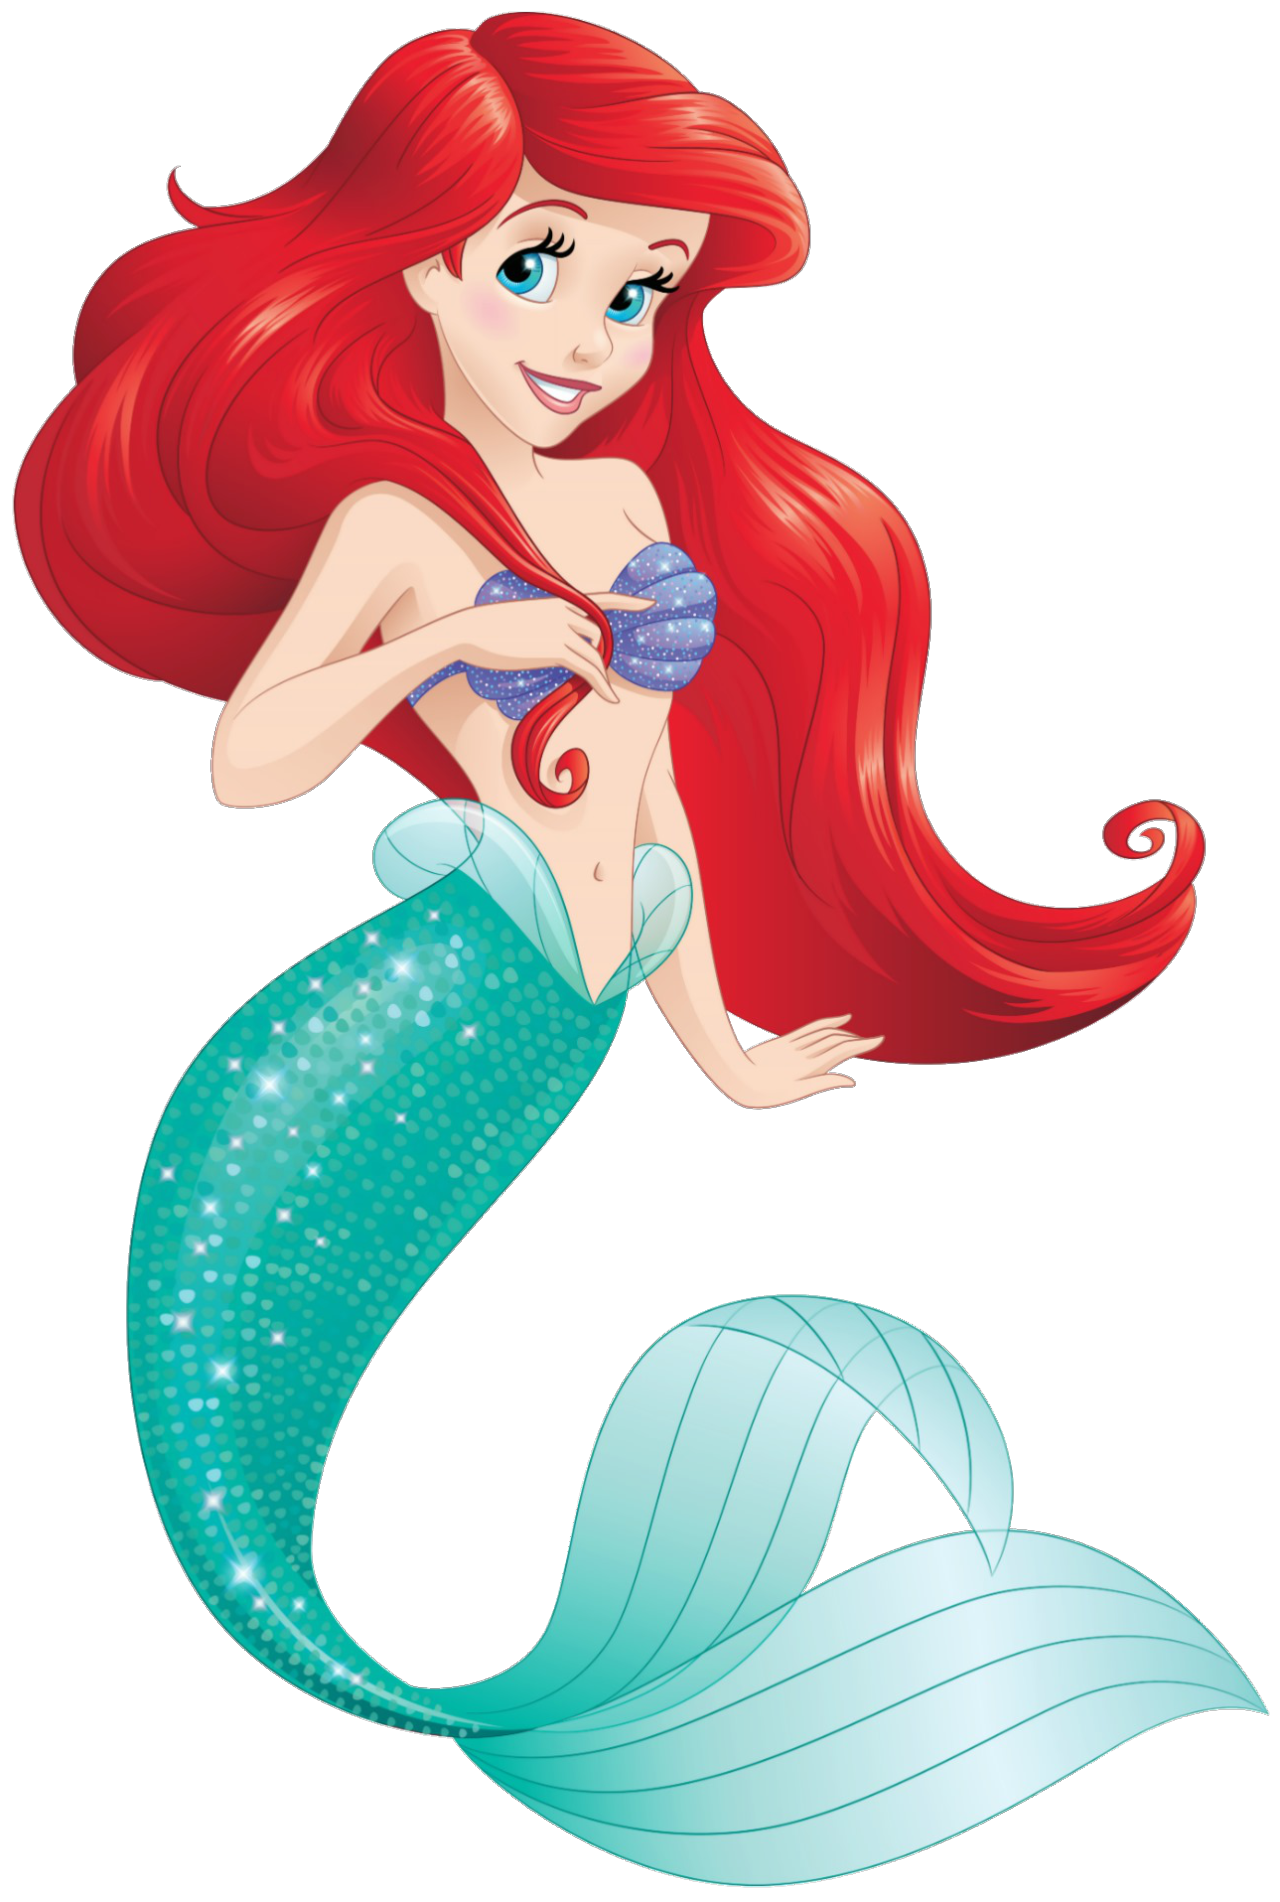 Png transparent free images. Clipart numbers mermaid